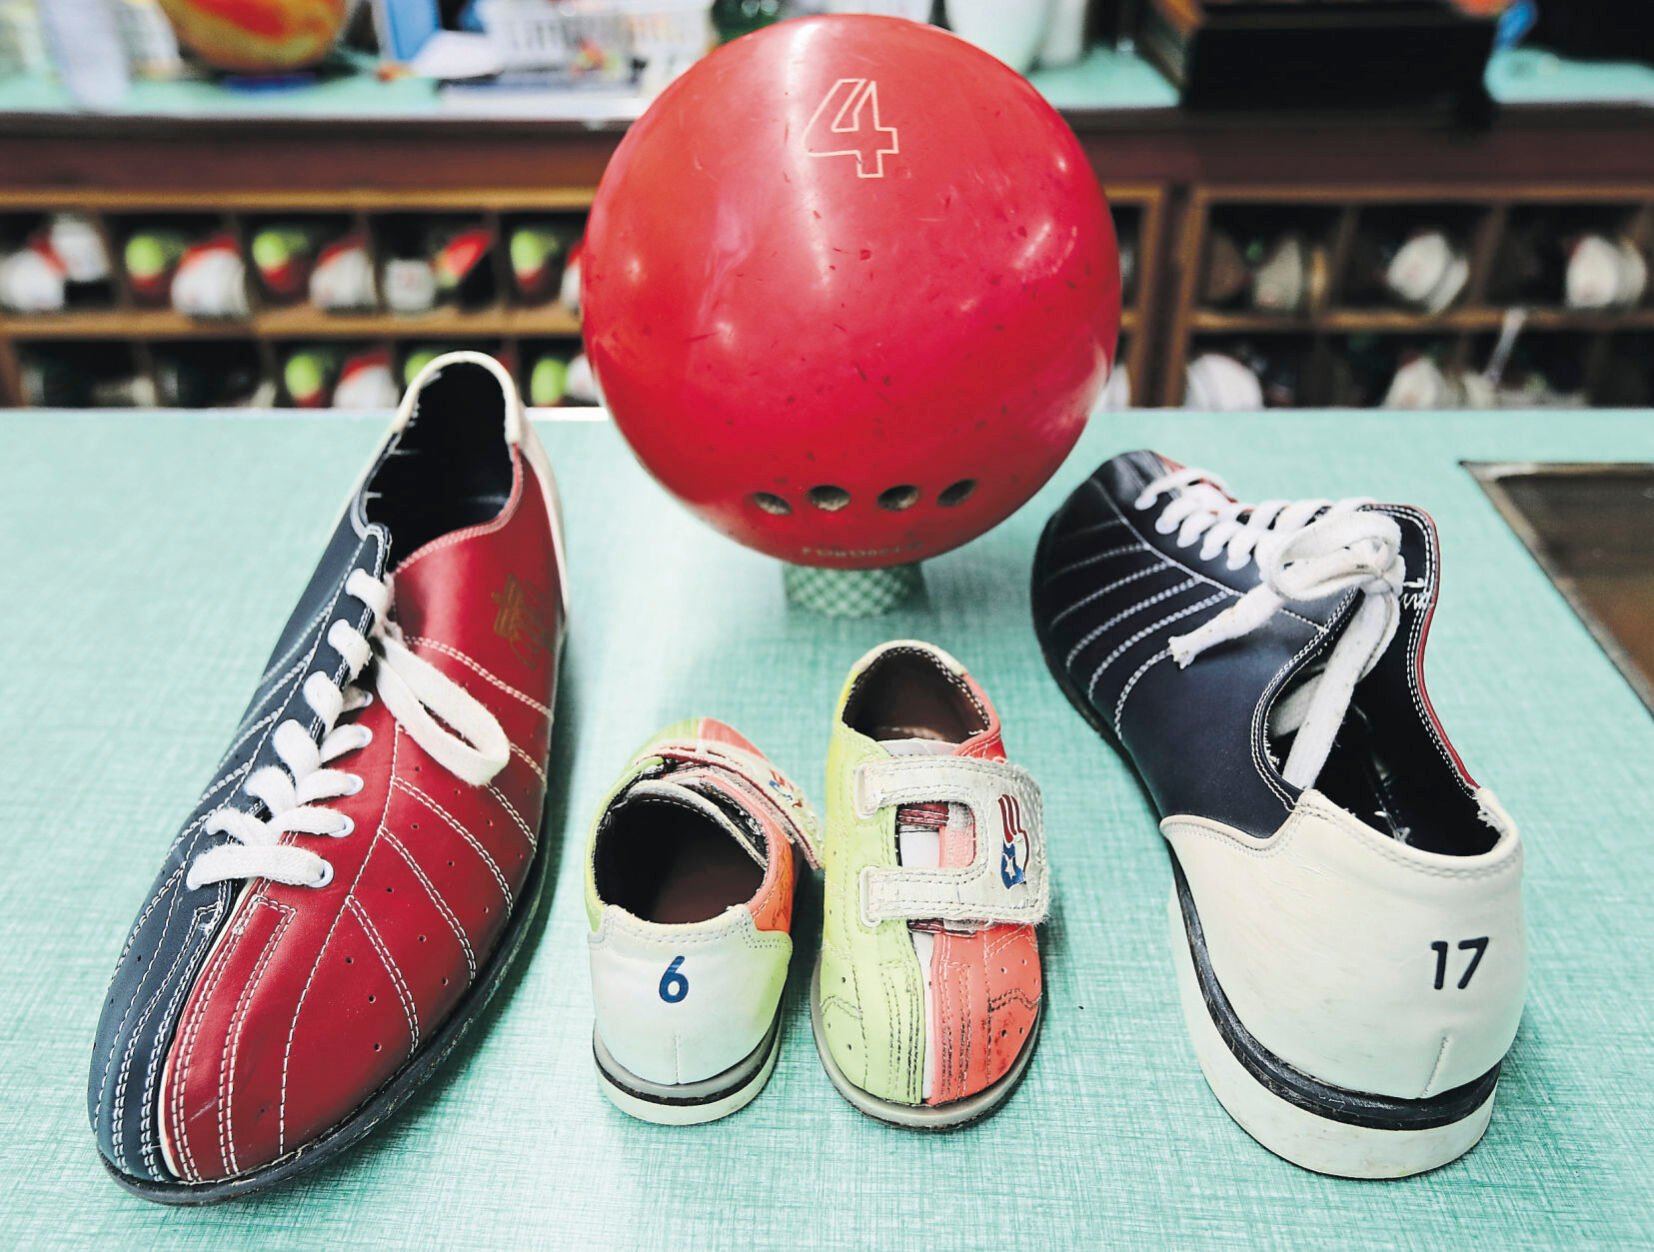 Bowling shoe sizes ranging from adult 17 to youth 6.    PHOTO CREDIT: Dave Kettering